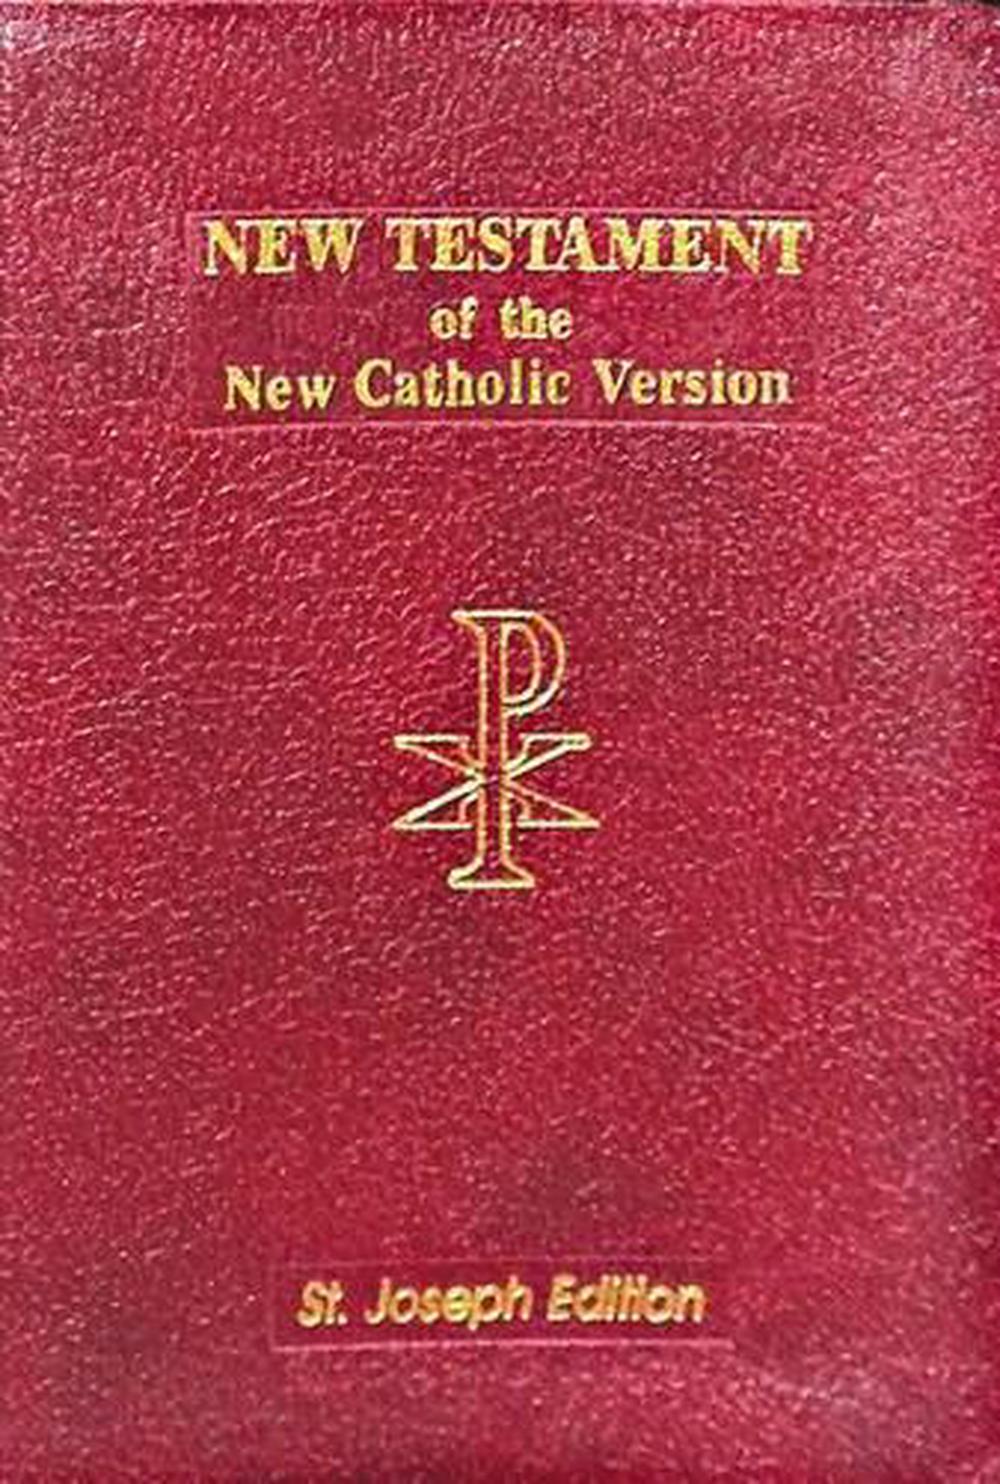 New American New Testament Bible by Catholic Book Publishing Co ...